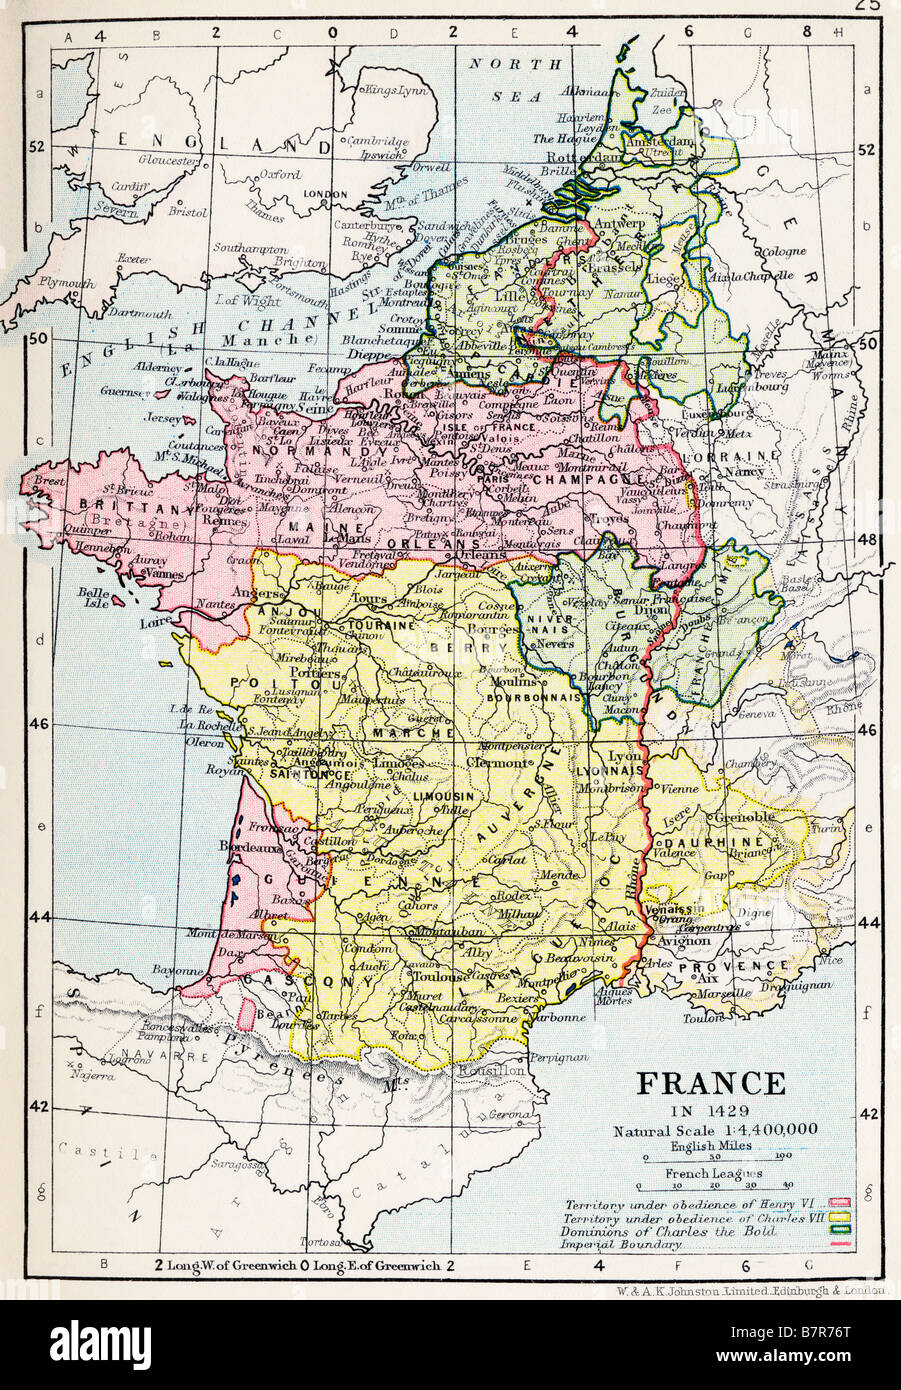 Map of France in 1429. Stock Photo